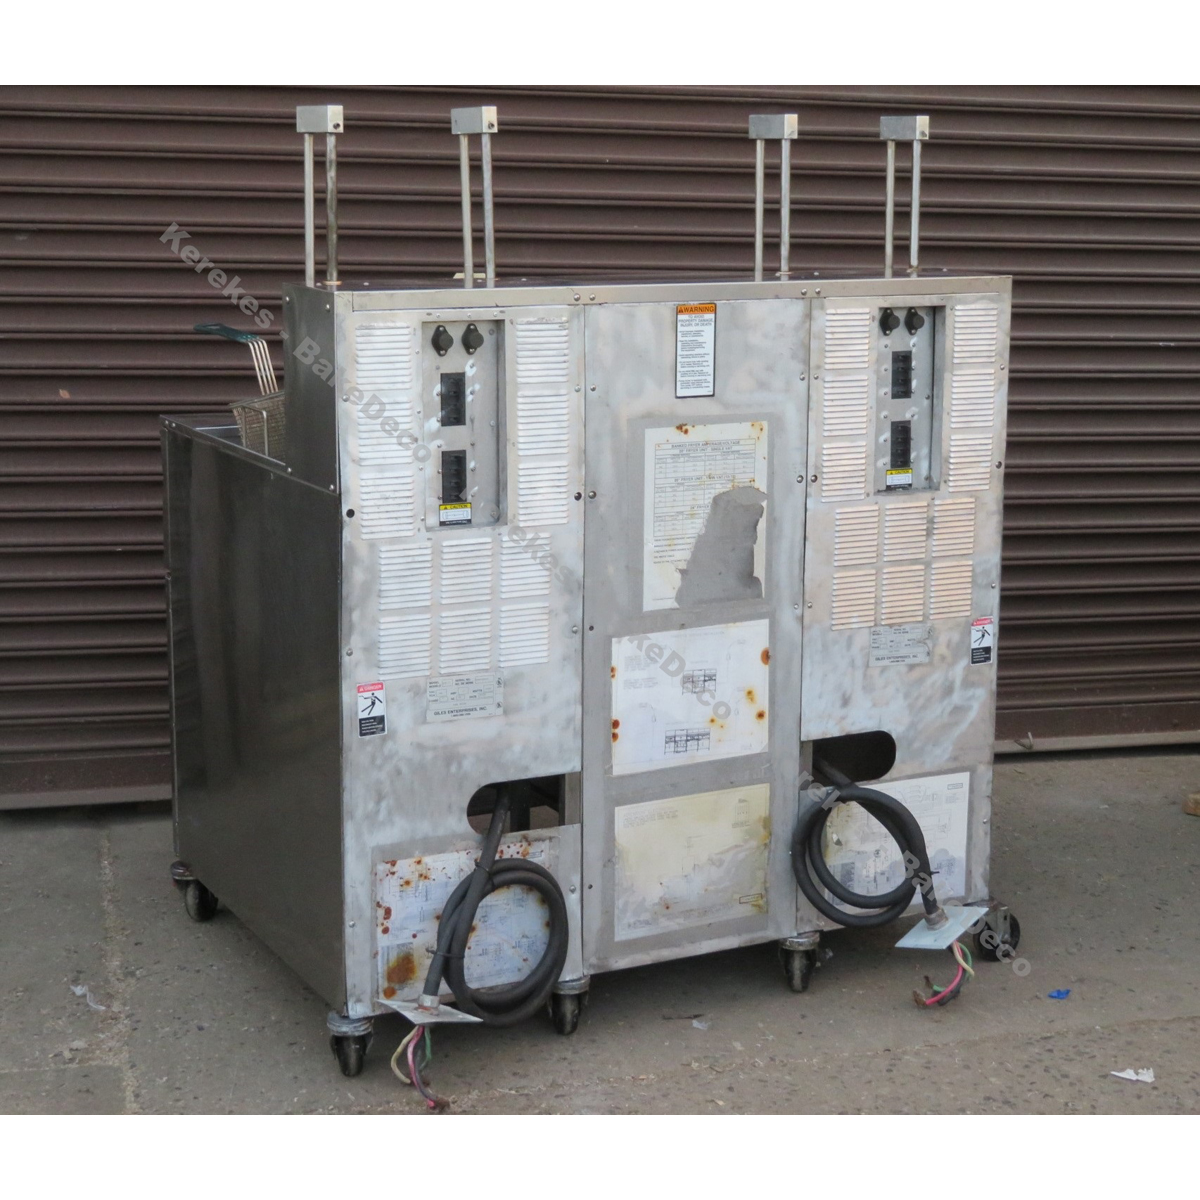 Giles Electric Banked Fryer EOF-14/FFLT/14, W/Autolift System, Used Excellent Condition image 4